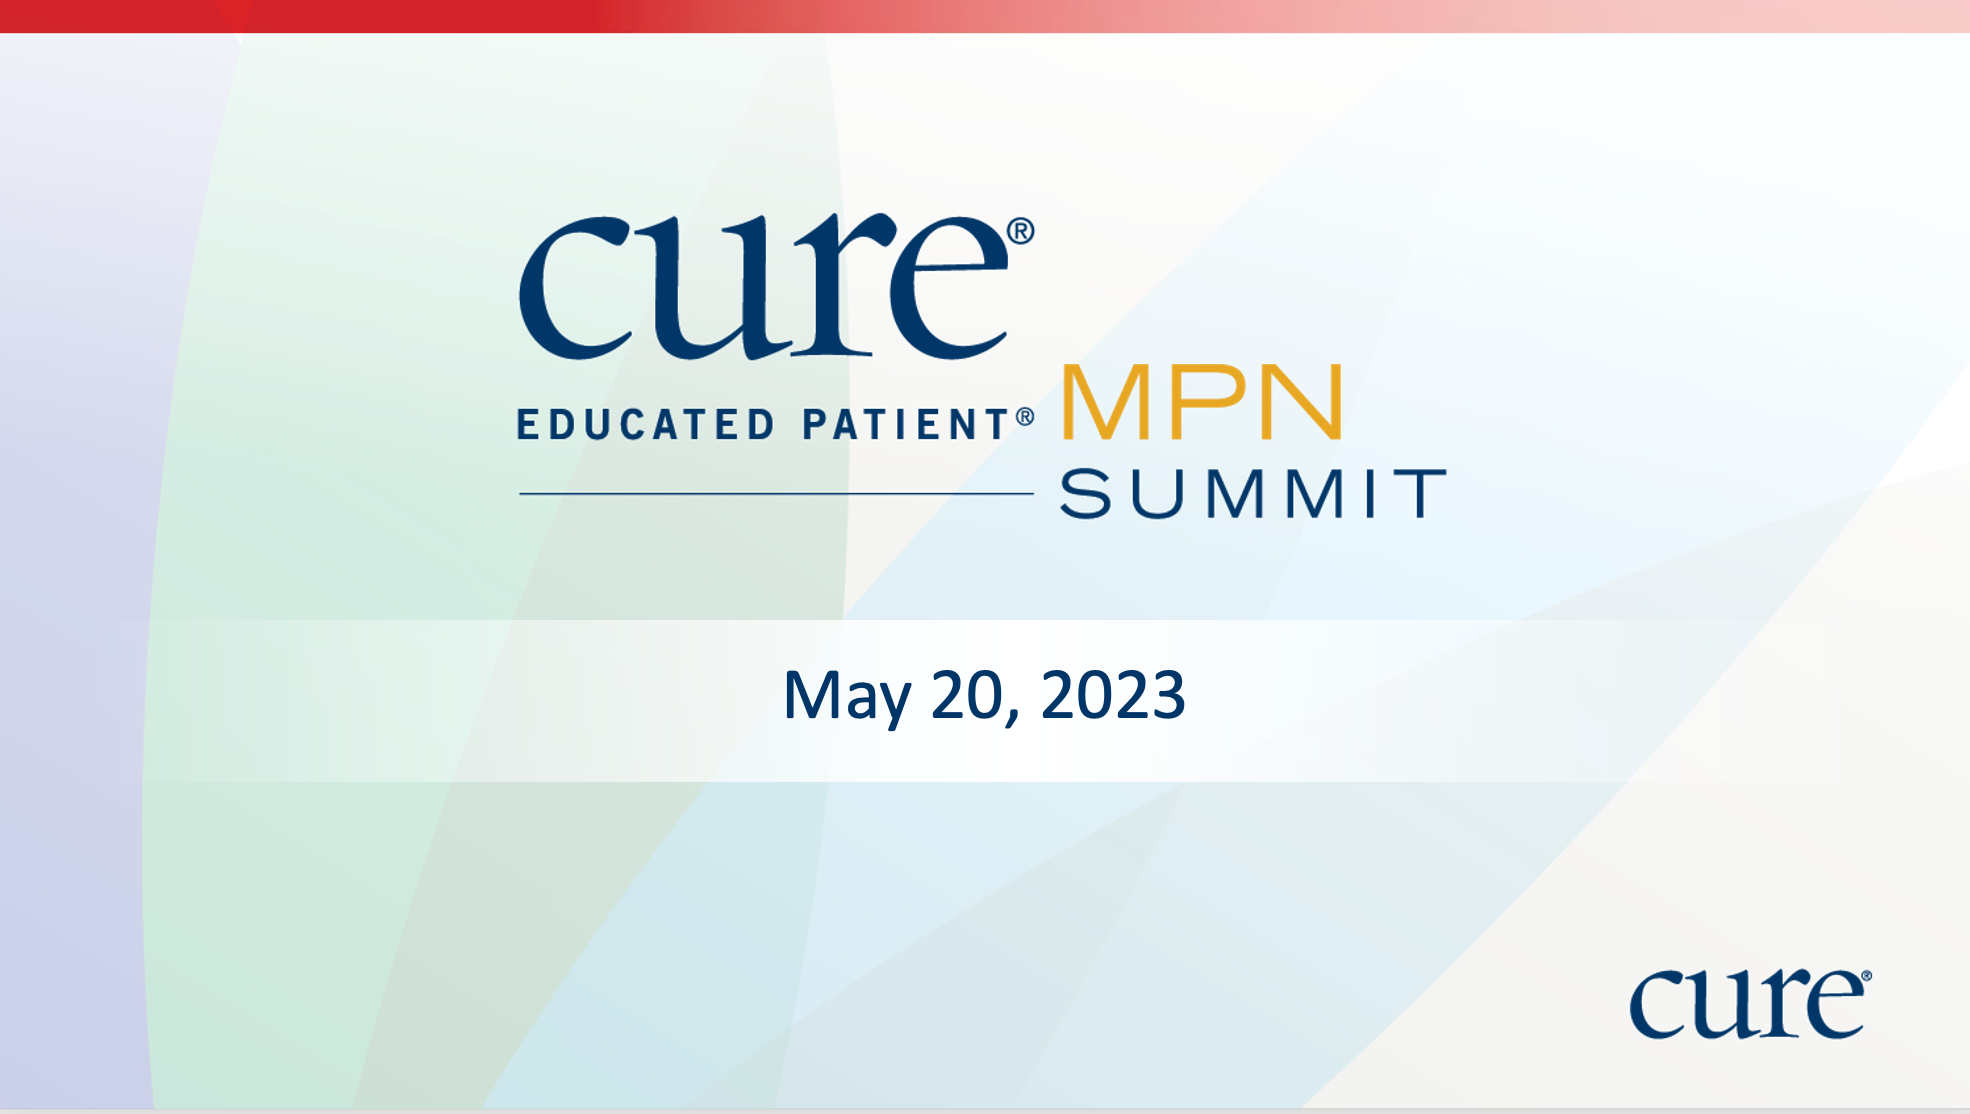 CURE Educated Patient MPN Summit